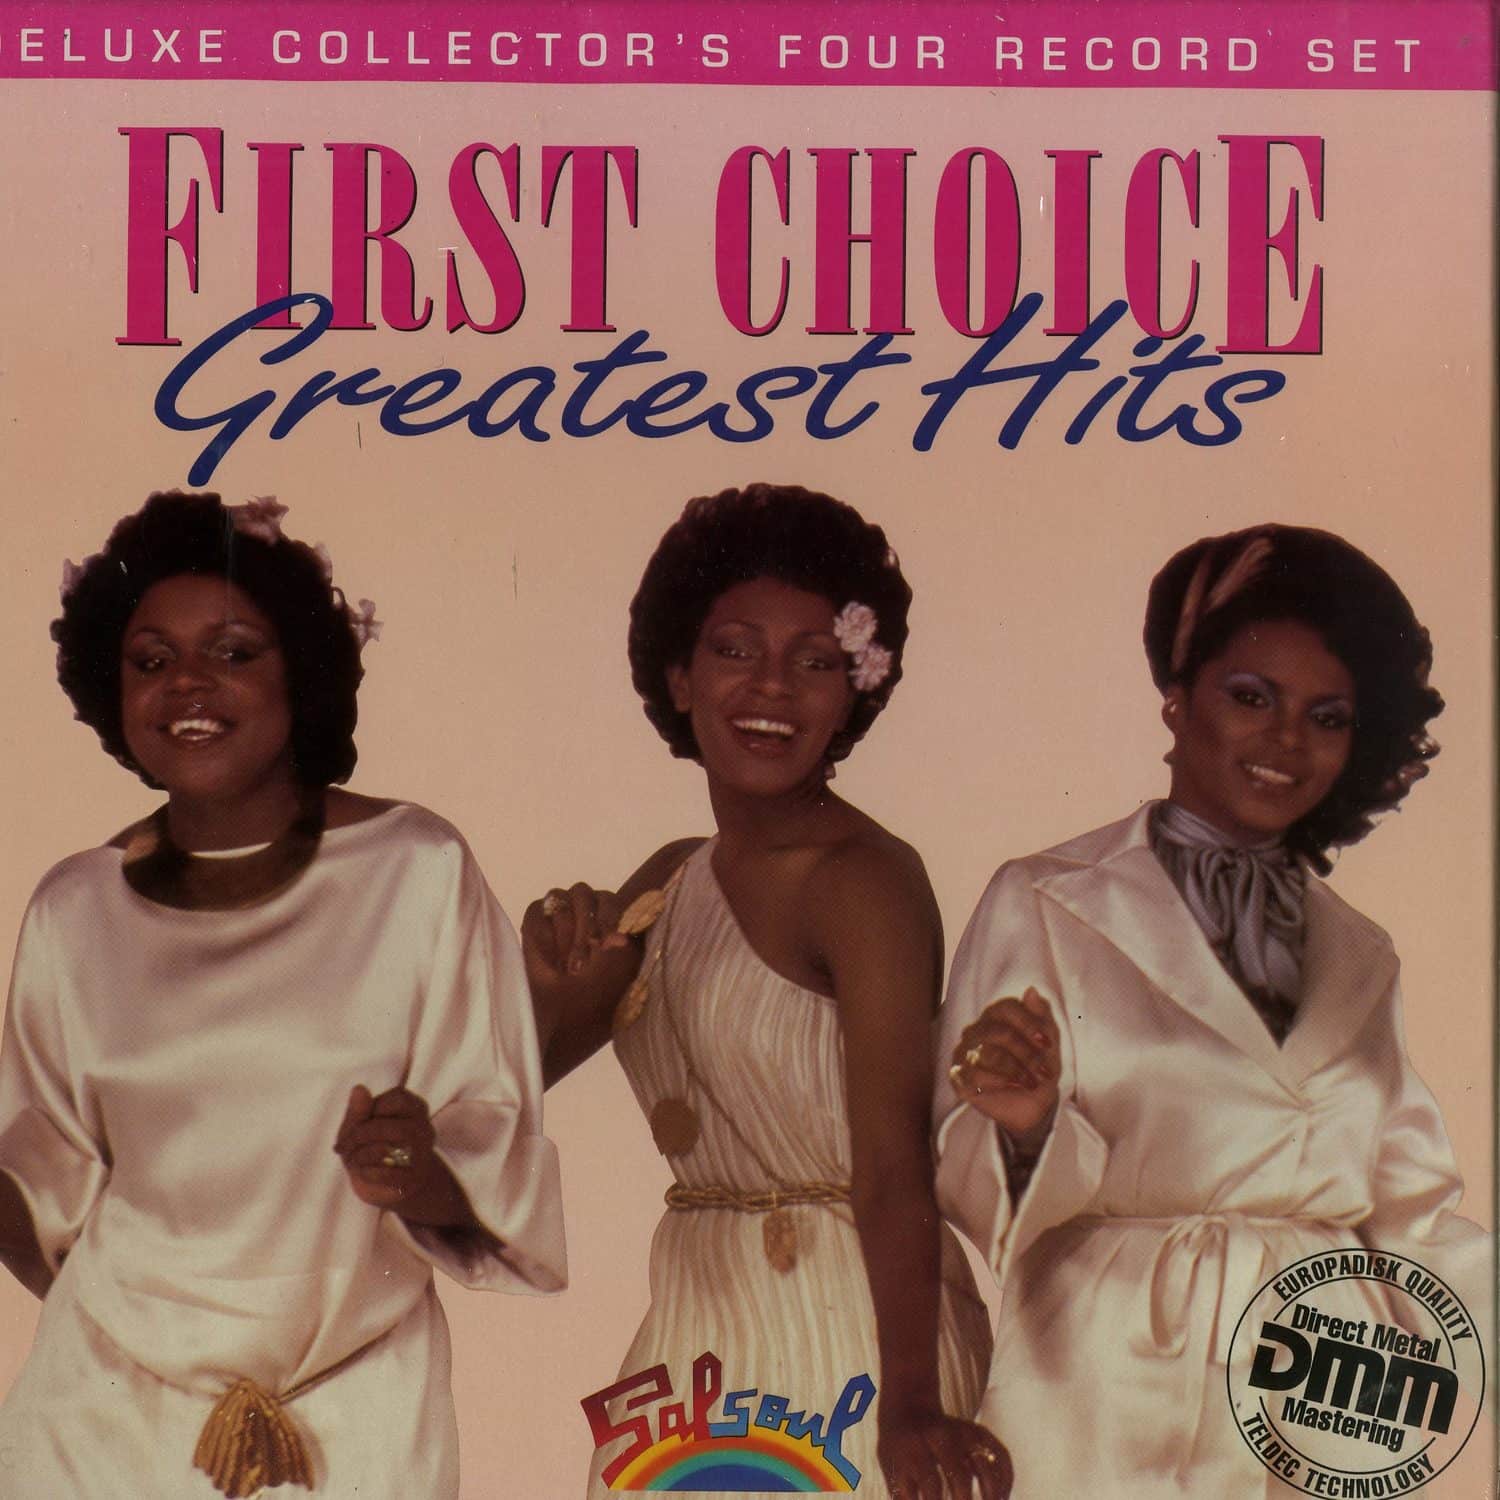 First Choice - GREATEST HITS 